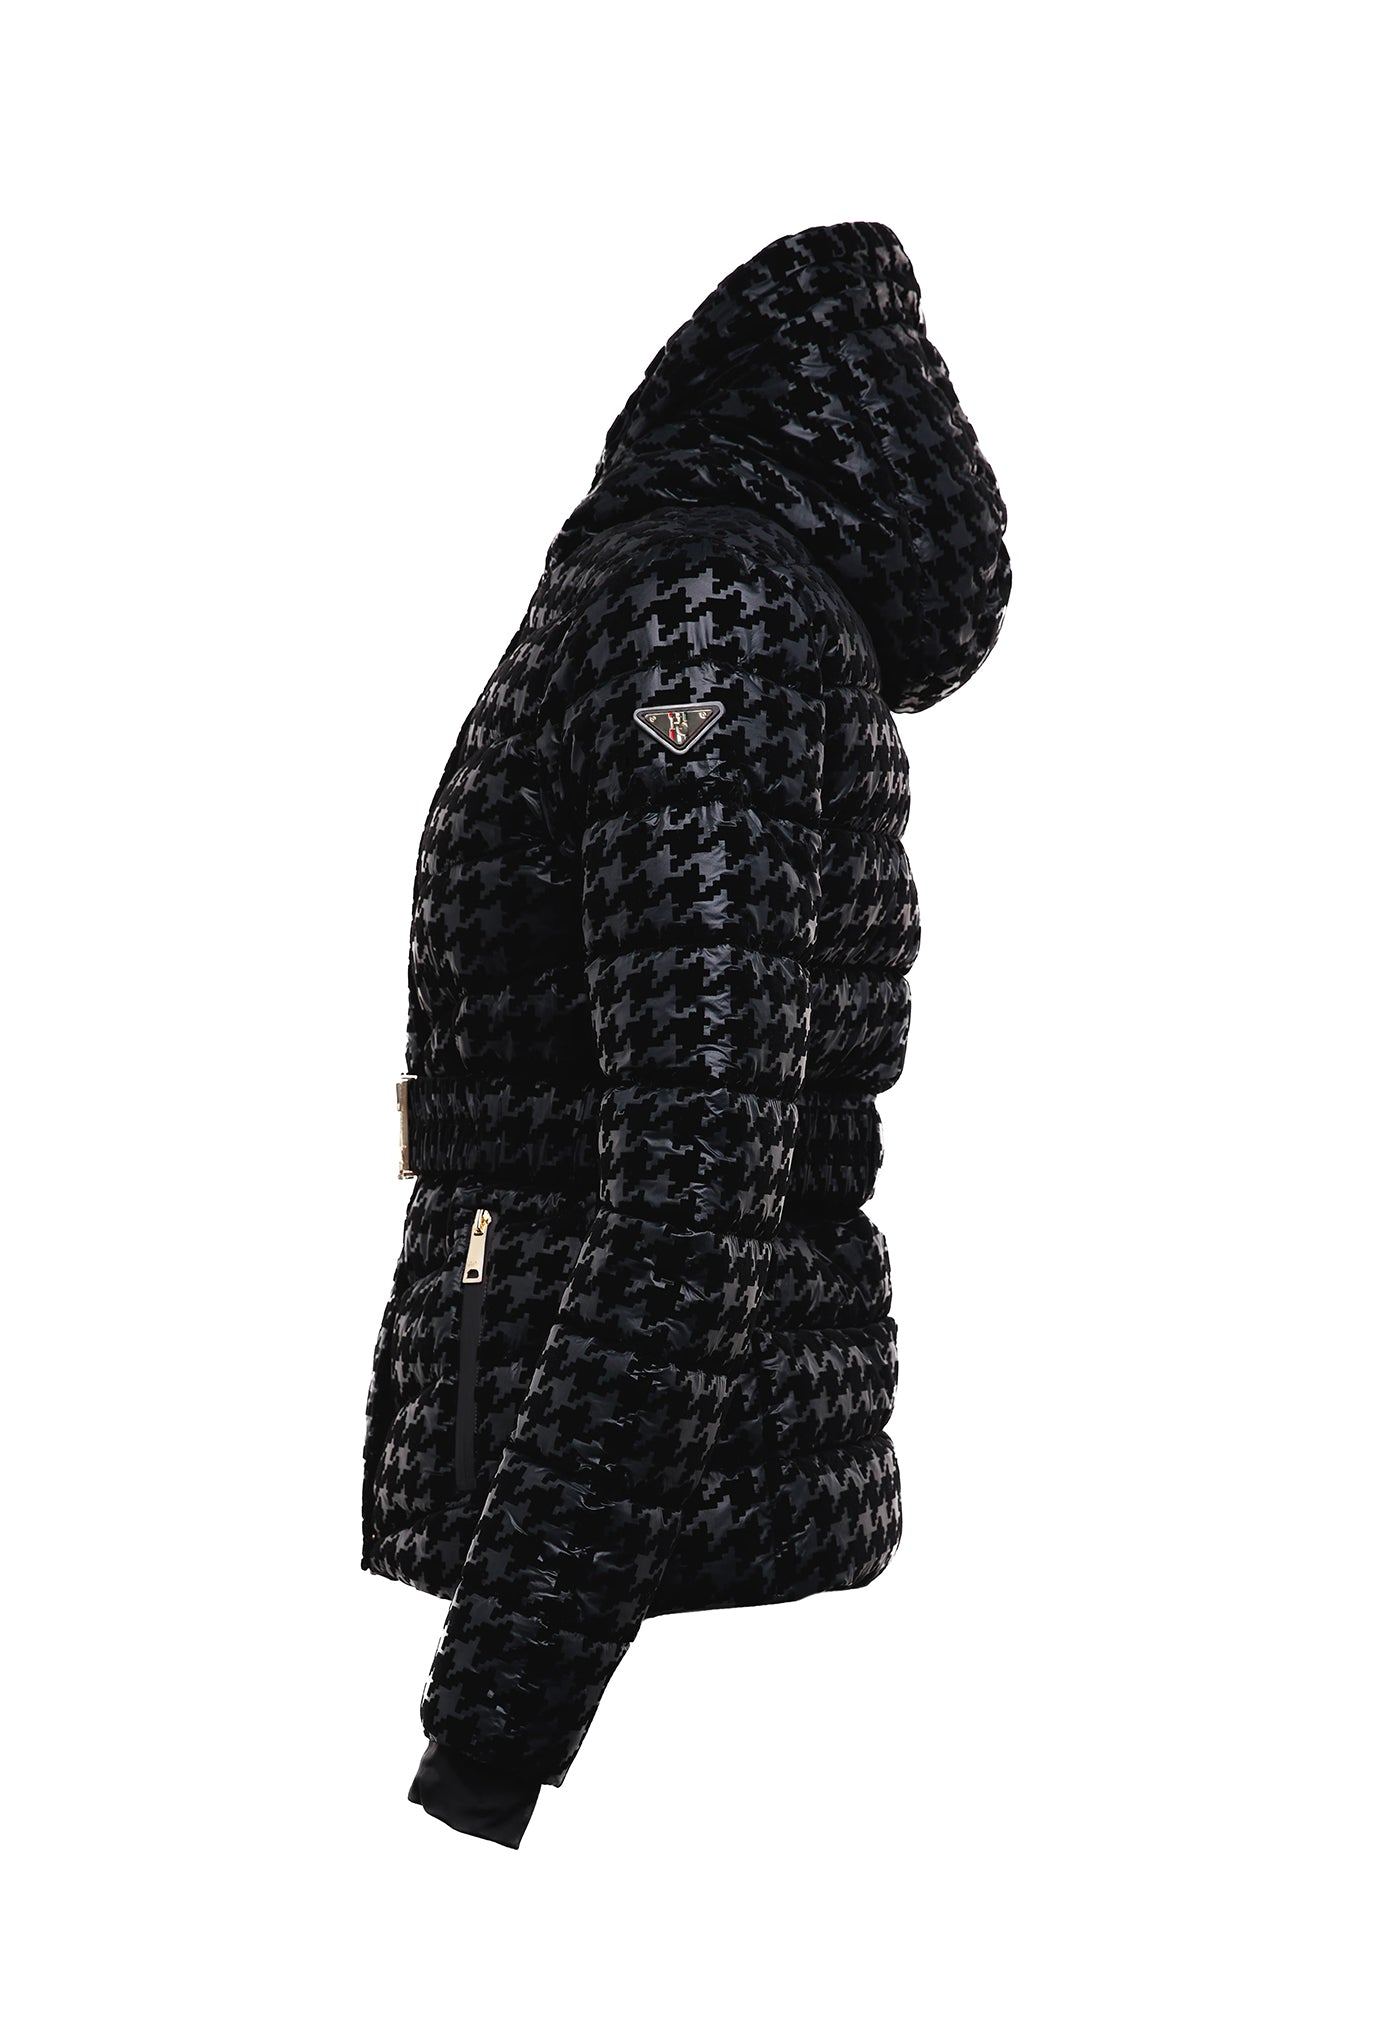 Vermont Puffer Jacket - Mono Houndstooth sold by Angel Divine